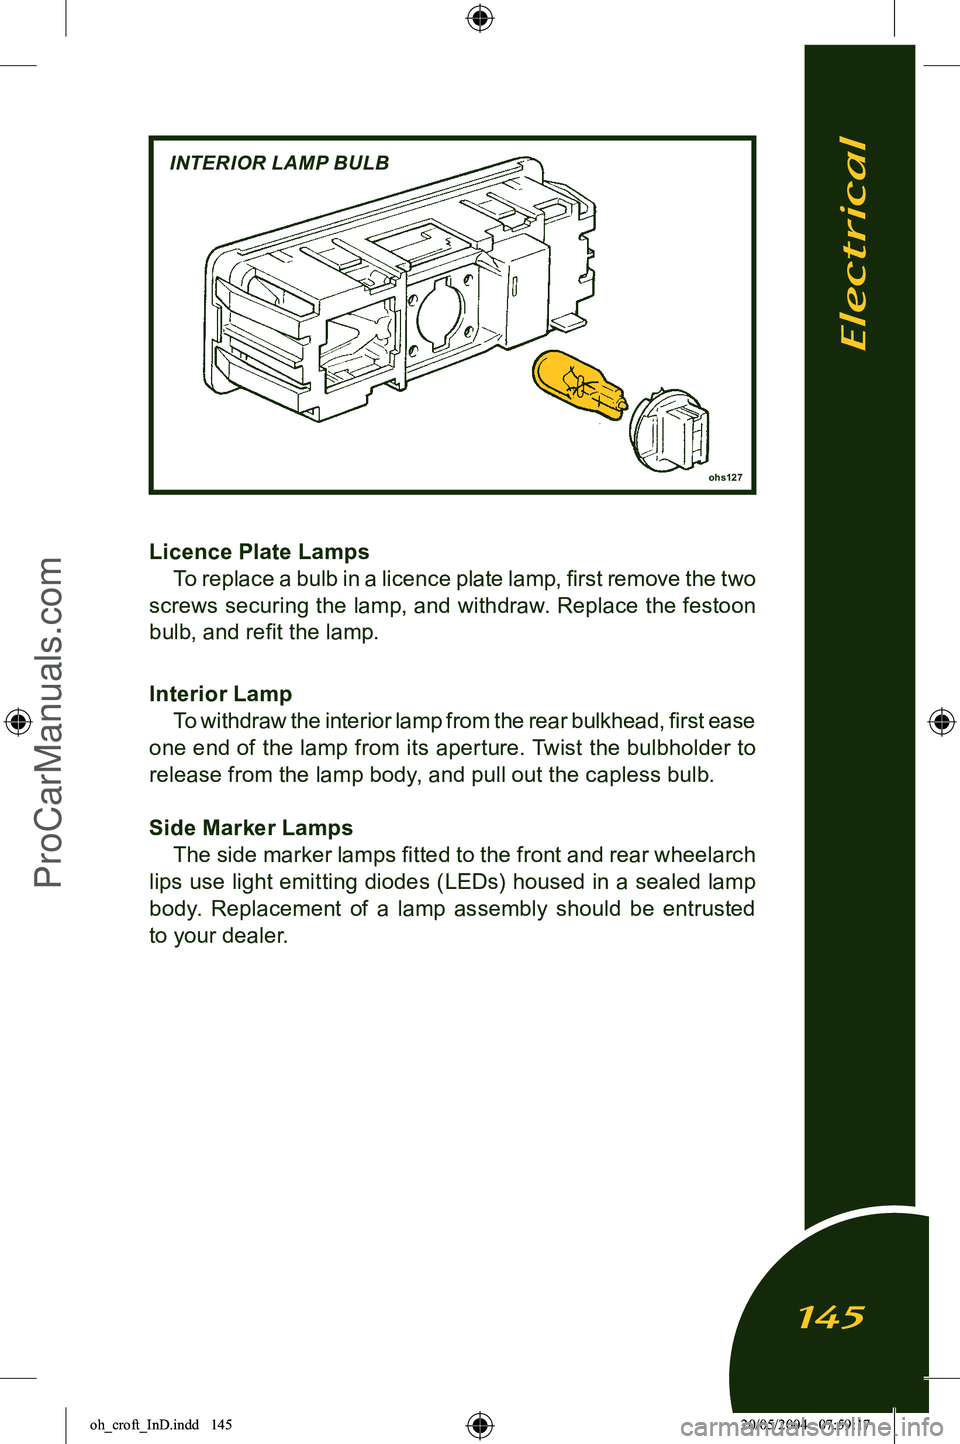 LOTUS ELISE 2005 Service Manual 
Licence Plate Lamps To replace a bulb in a licence plate lamp, ﬁrst remove the two 
screws securing the lamp, and withdraw. Replace the festoon 
bulb, and reﬁt the lamp.
Interior Lamp To withdraw